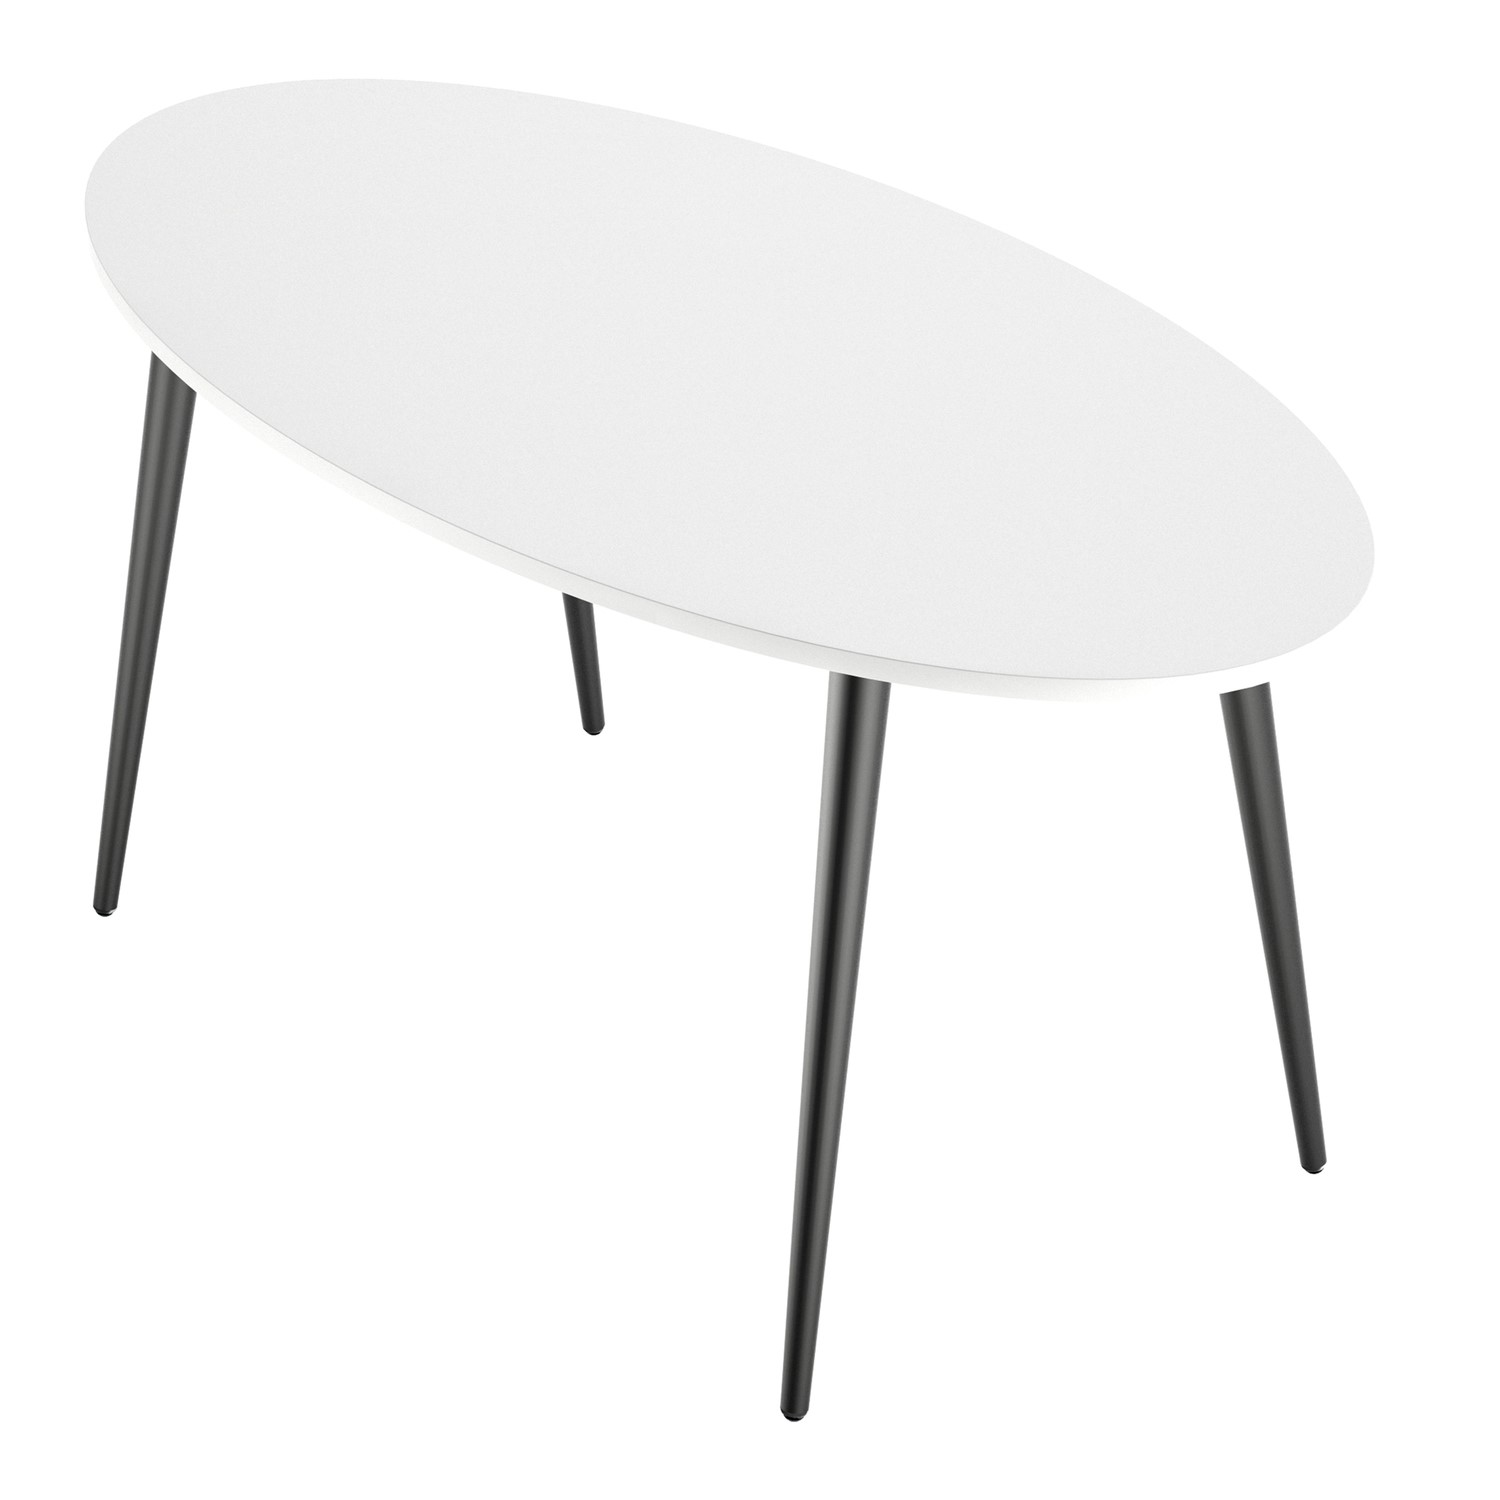 Oval Large Dining Table In White And Black Matt Furniture123